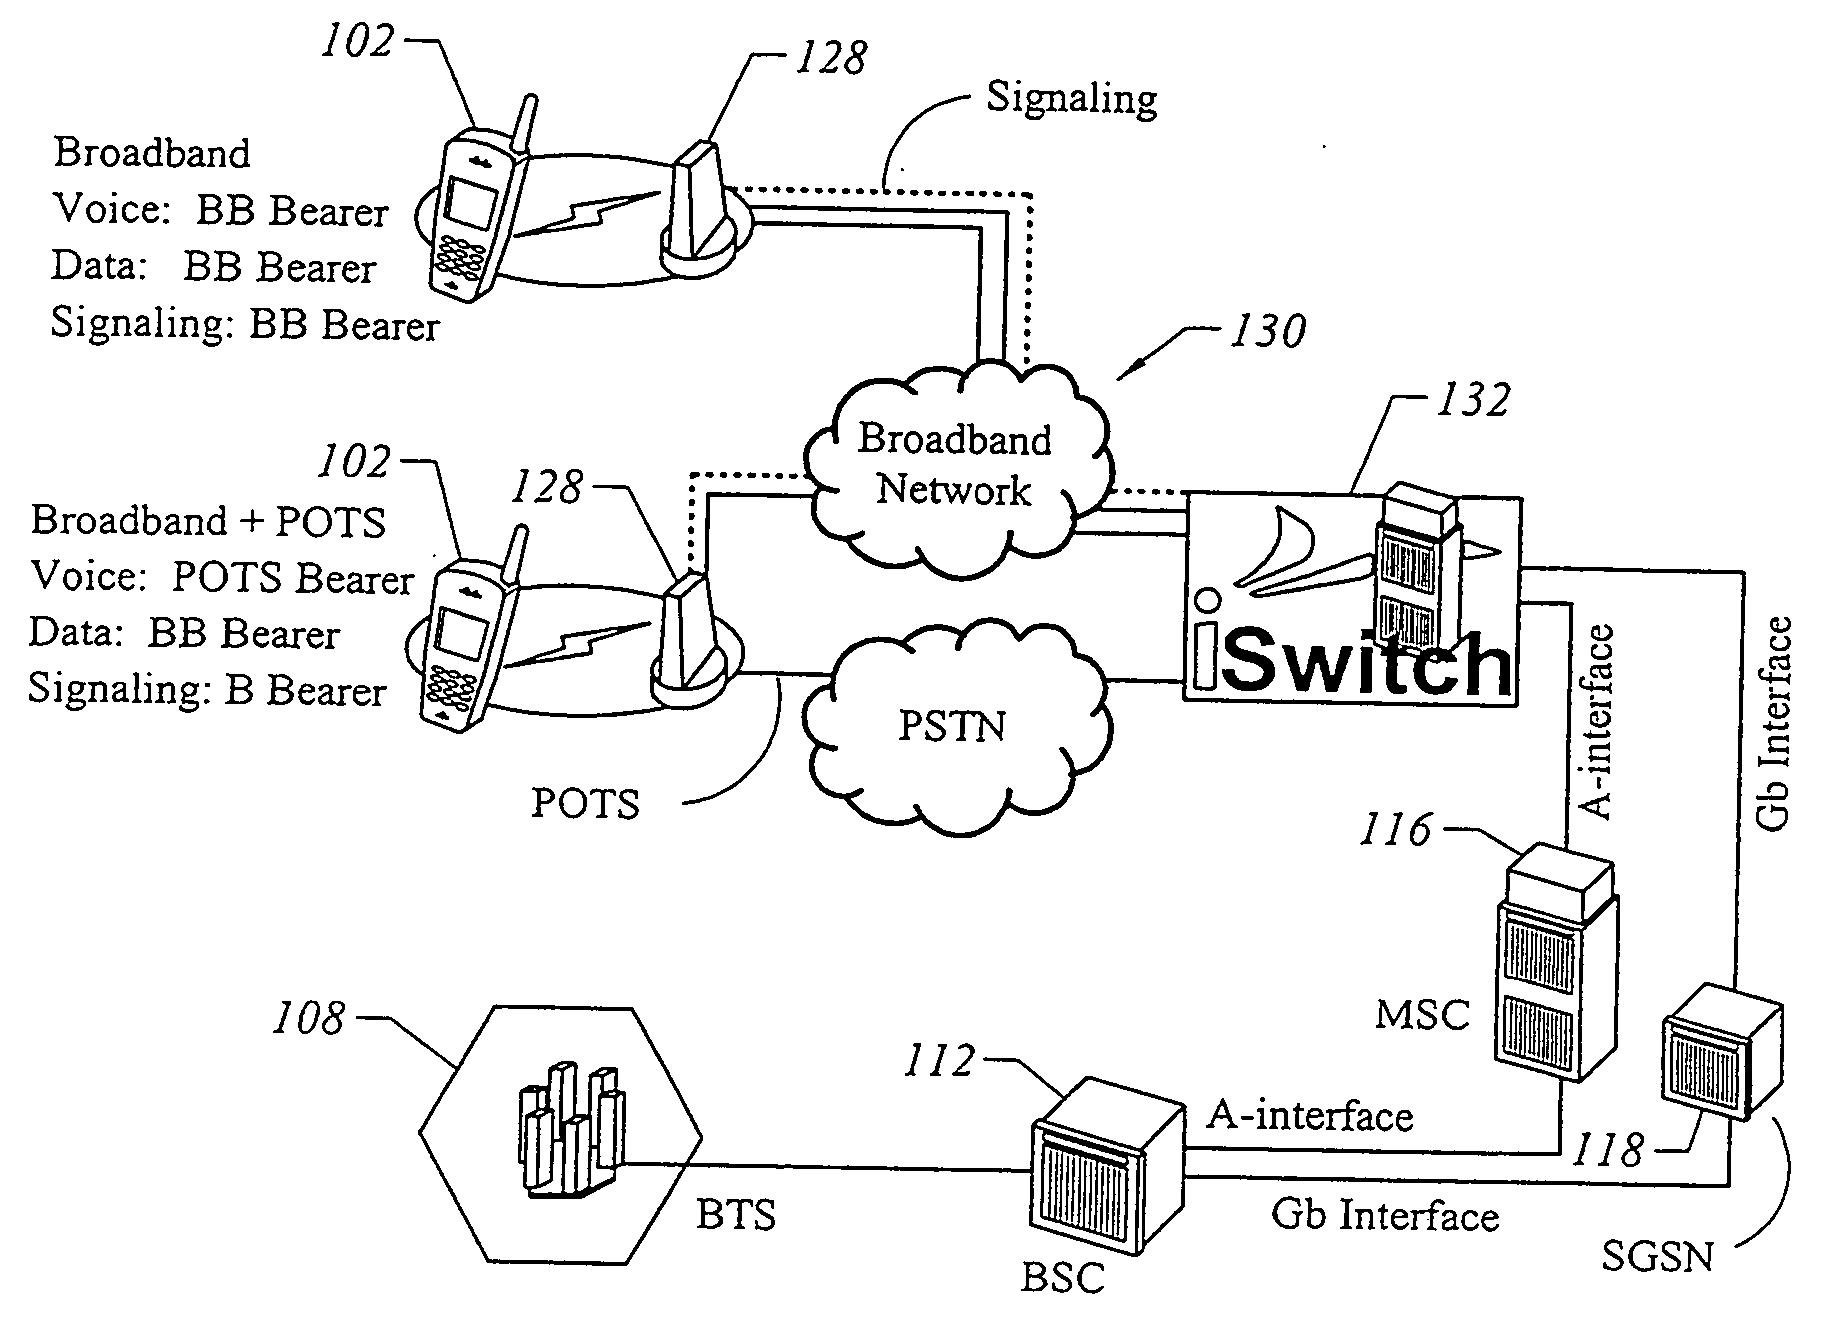 Mobile station implementation for switching between licensed and unlicensed wireless systems